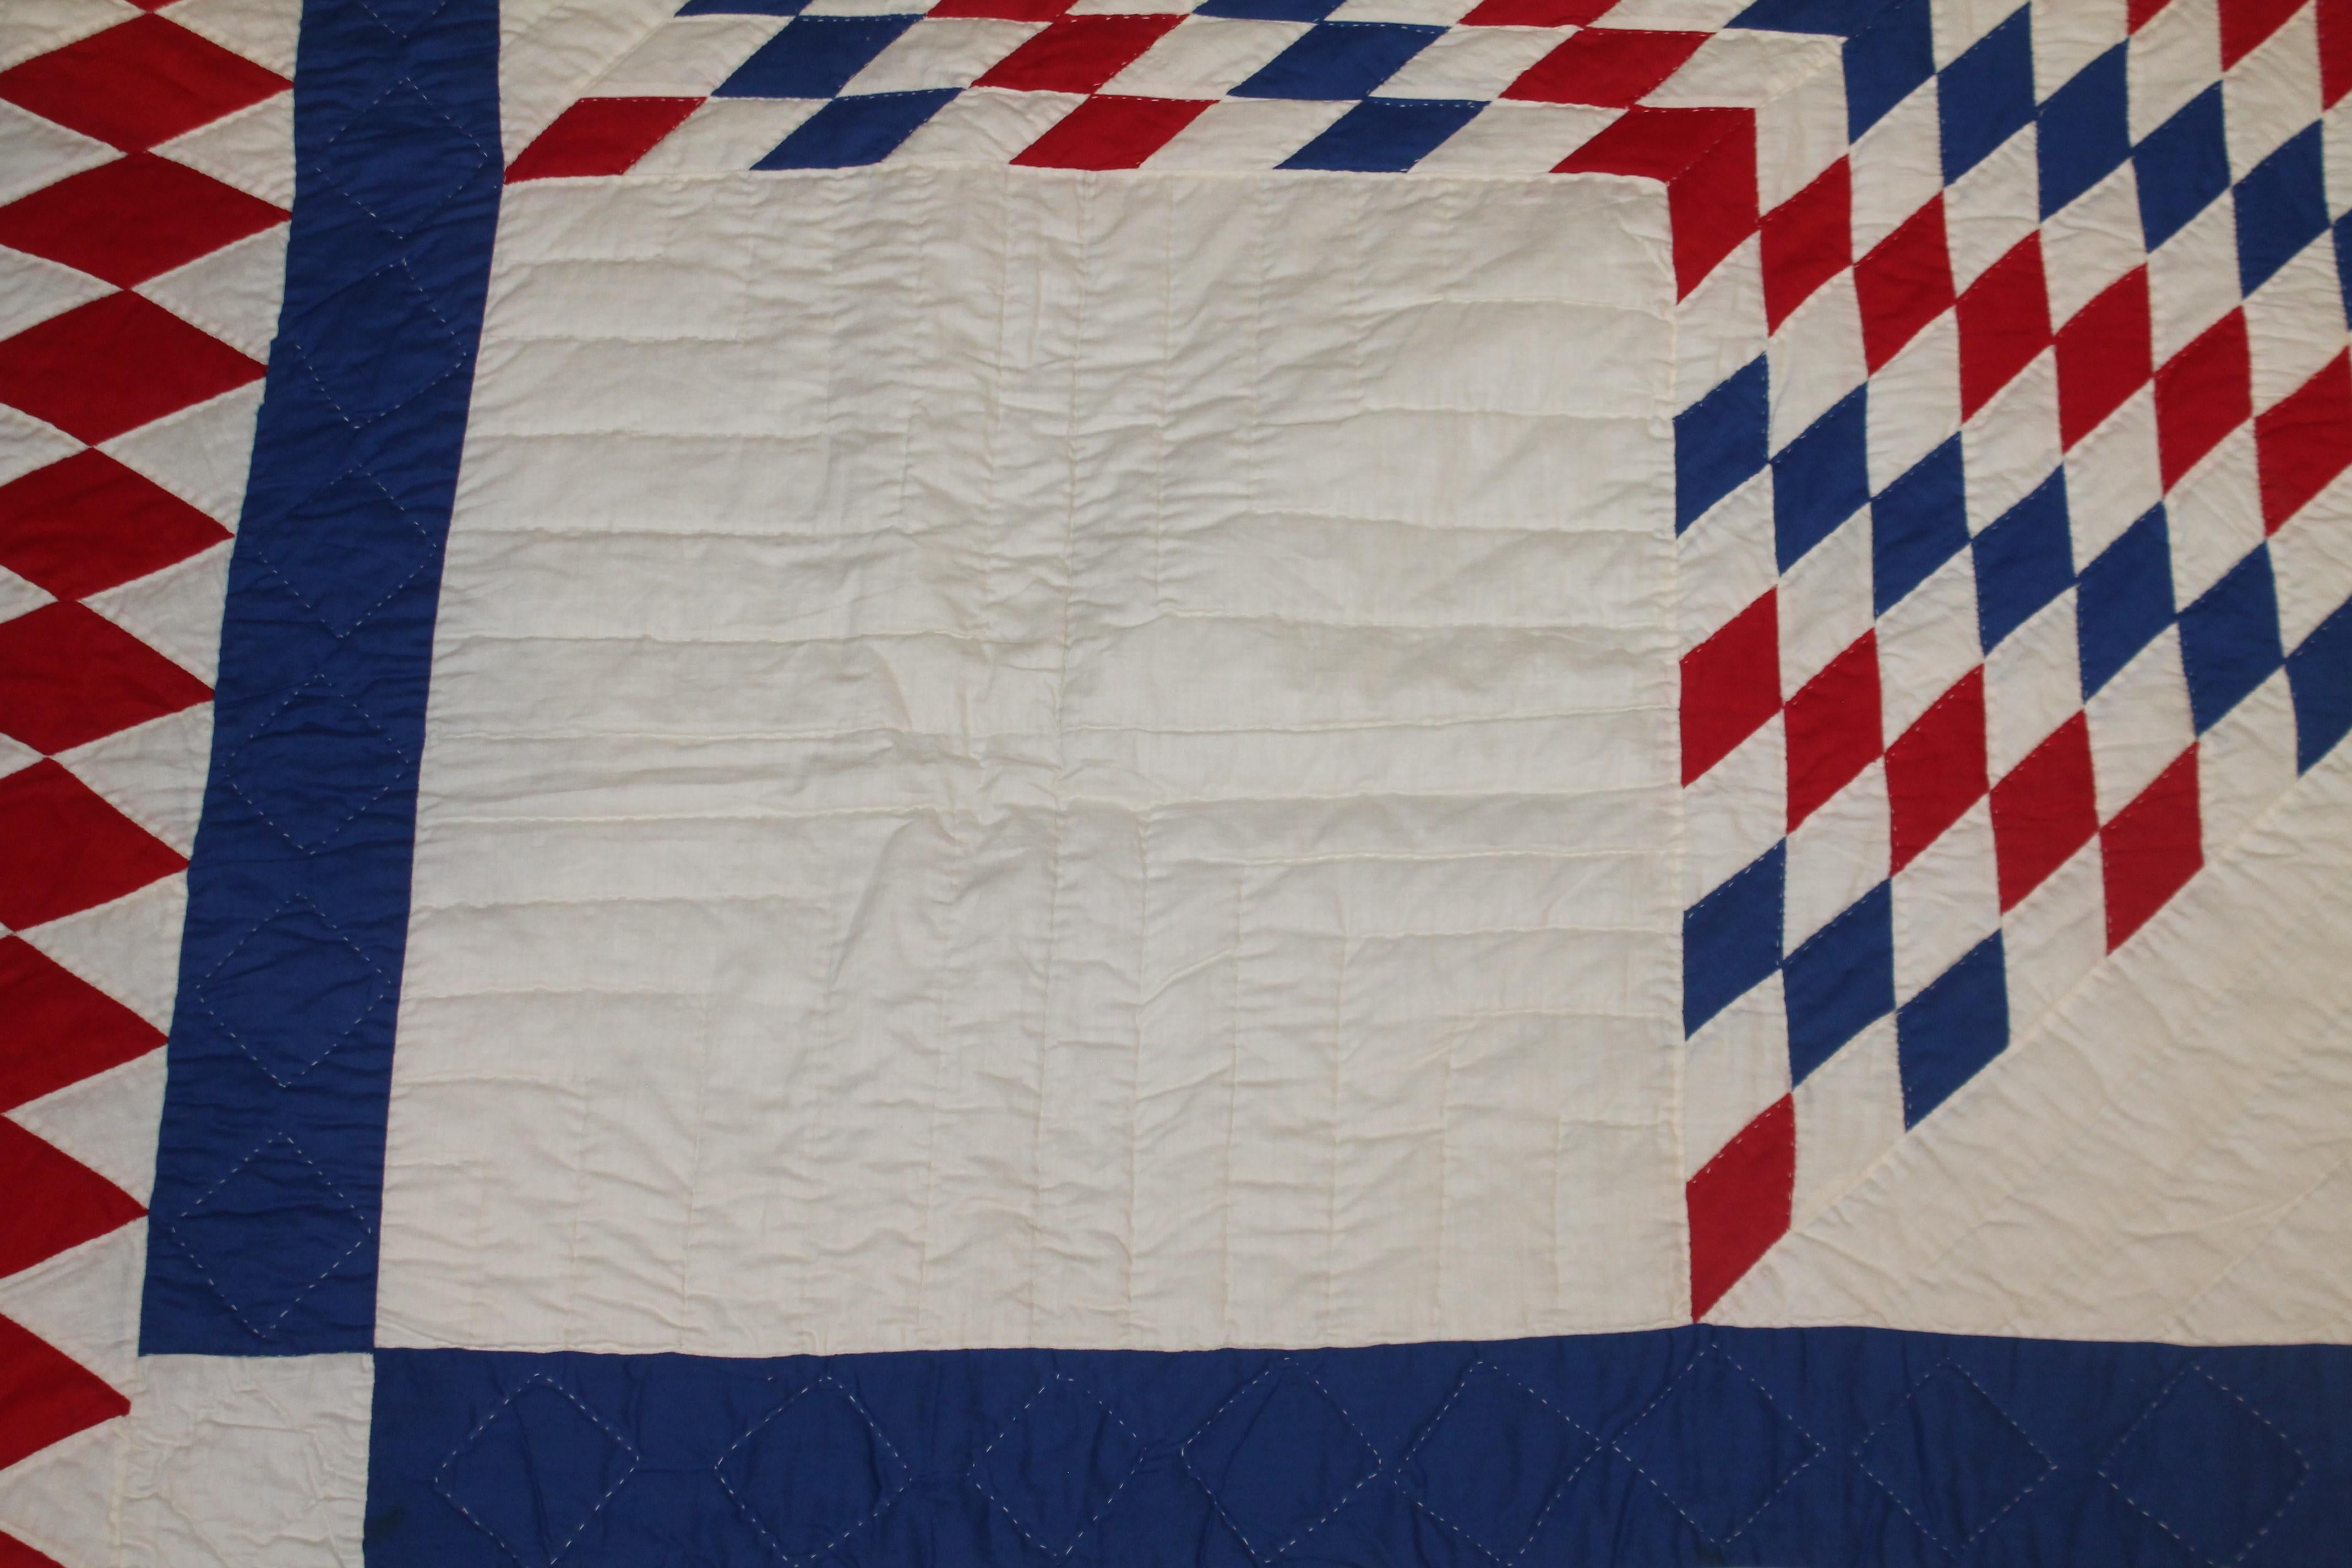 Hand-Crafted Amazing Patriotic Star Quilt with Diamond Border